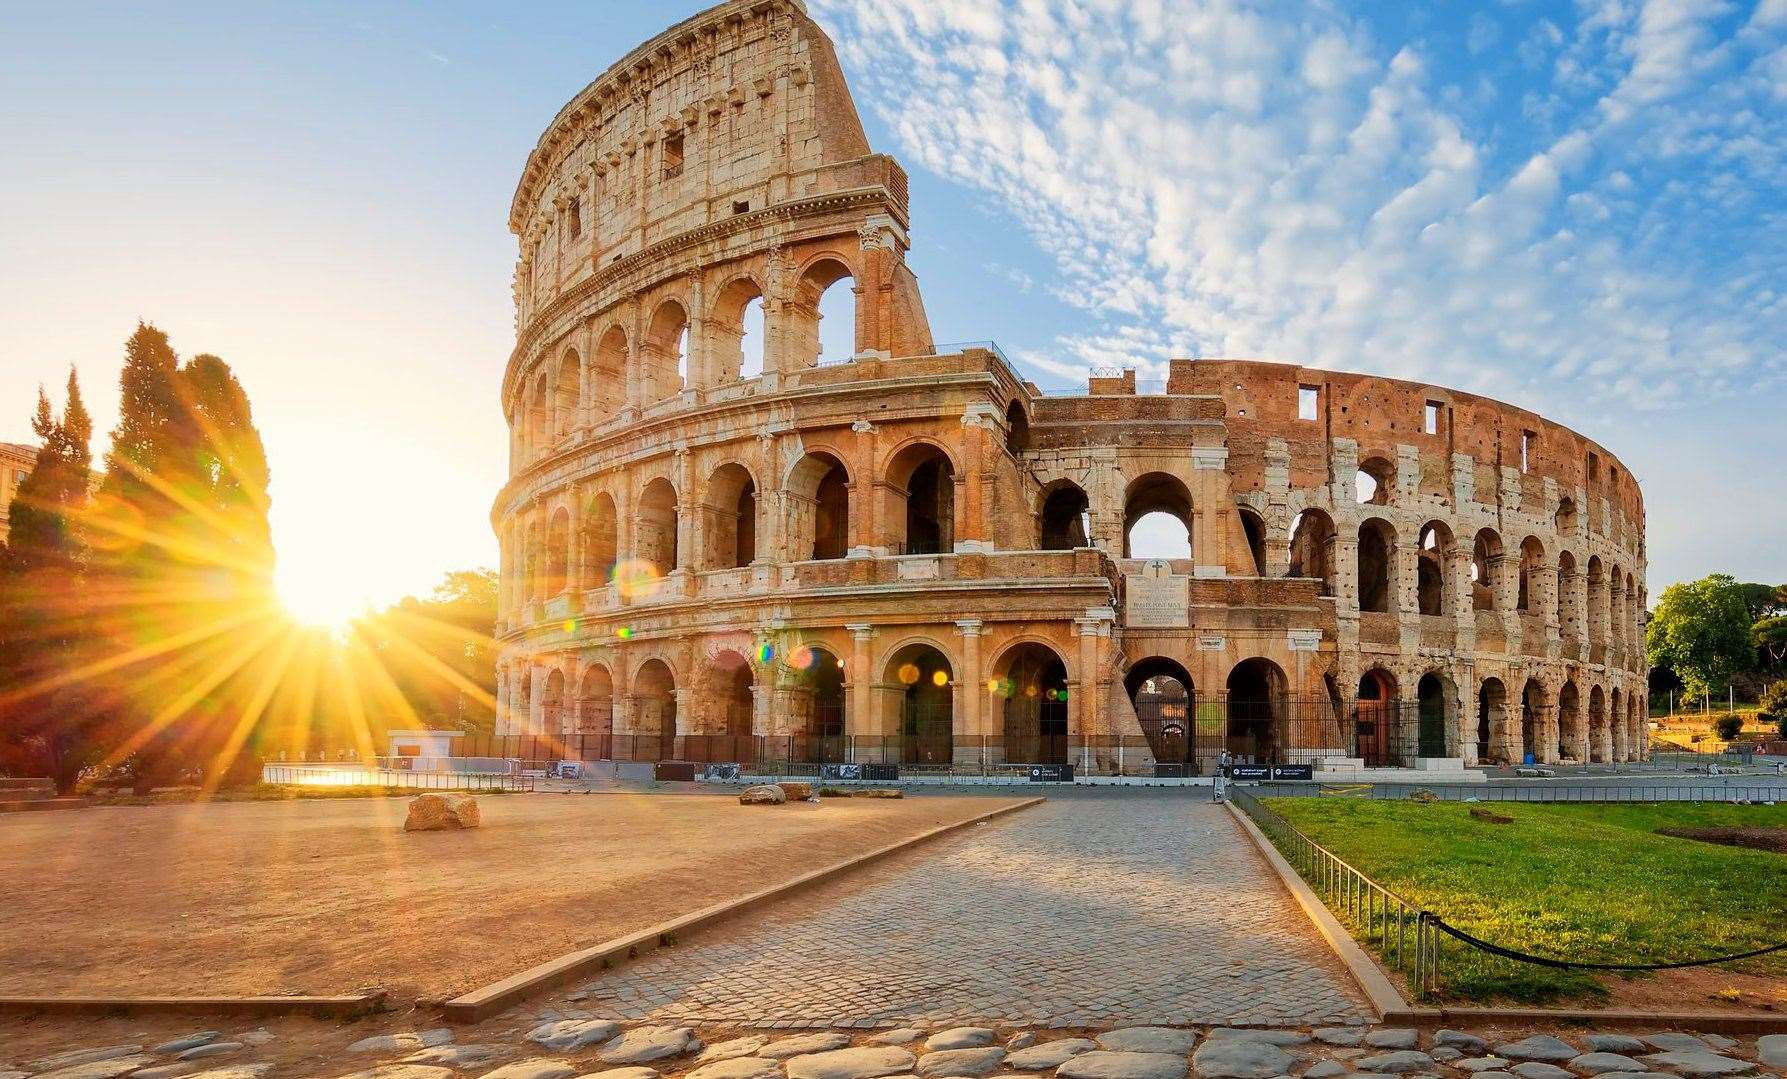 A red heat alert has been issued for a number of Italian cities including Rome. Image: Stock photo.